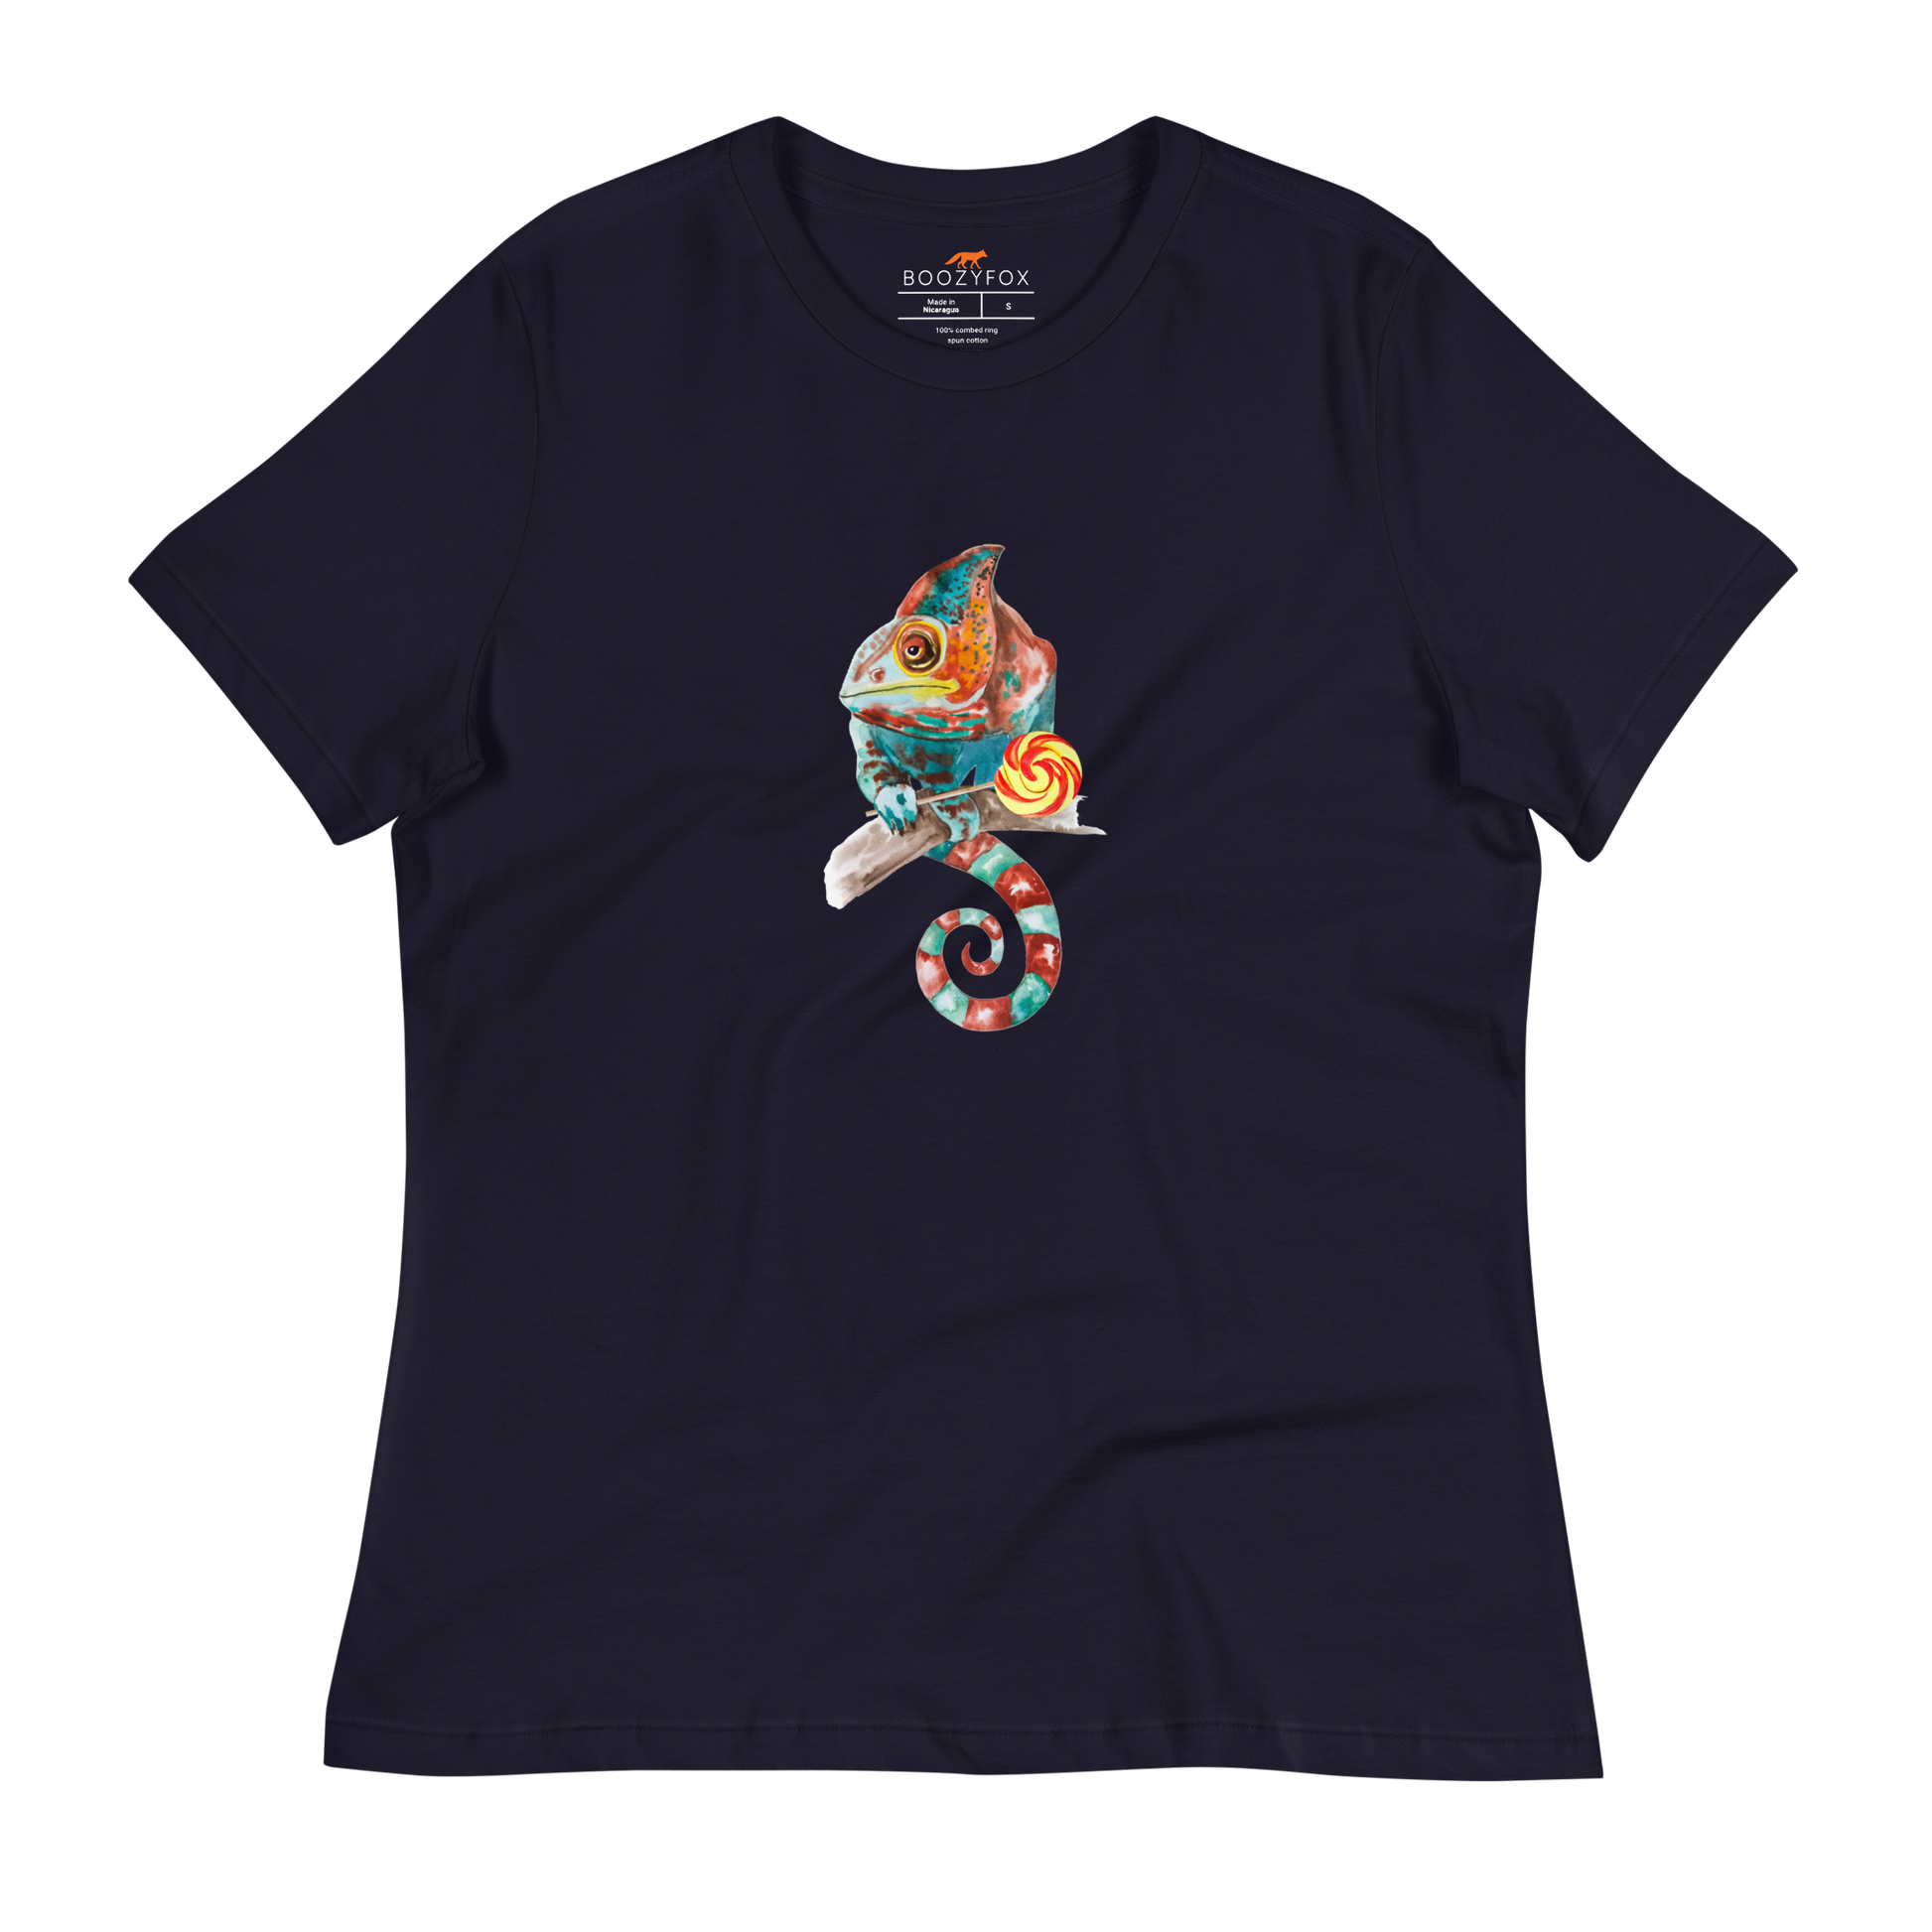 Women's relaxed navy Chameleon t-shirt featuring a colorful Chameleon With A Lollipop graphic on the chest - Women's Graphic Chameleon Tees - Boozy Fox